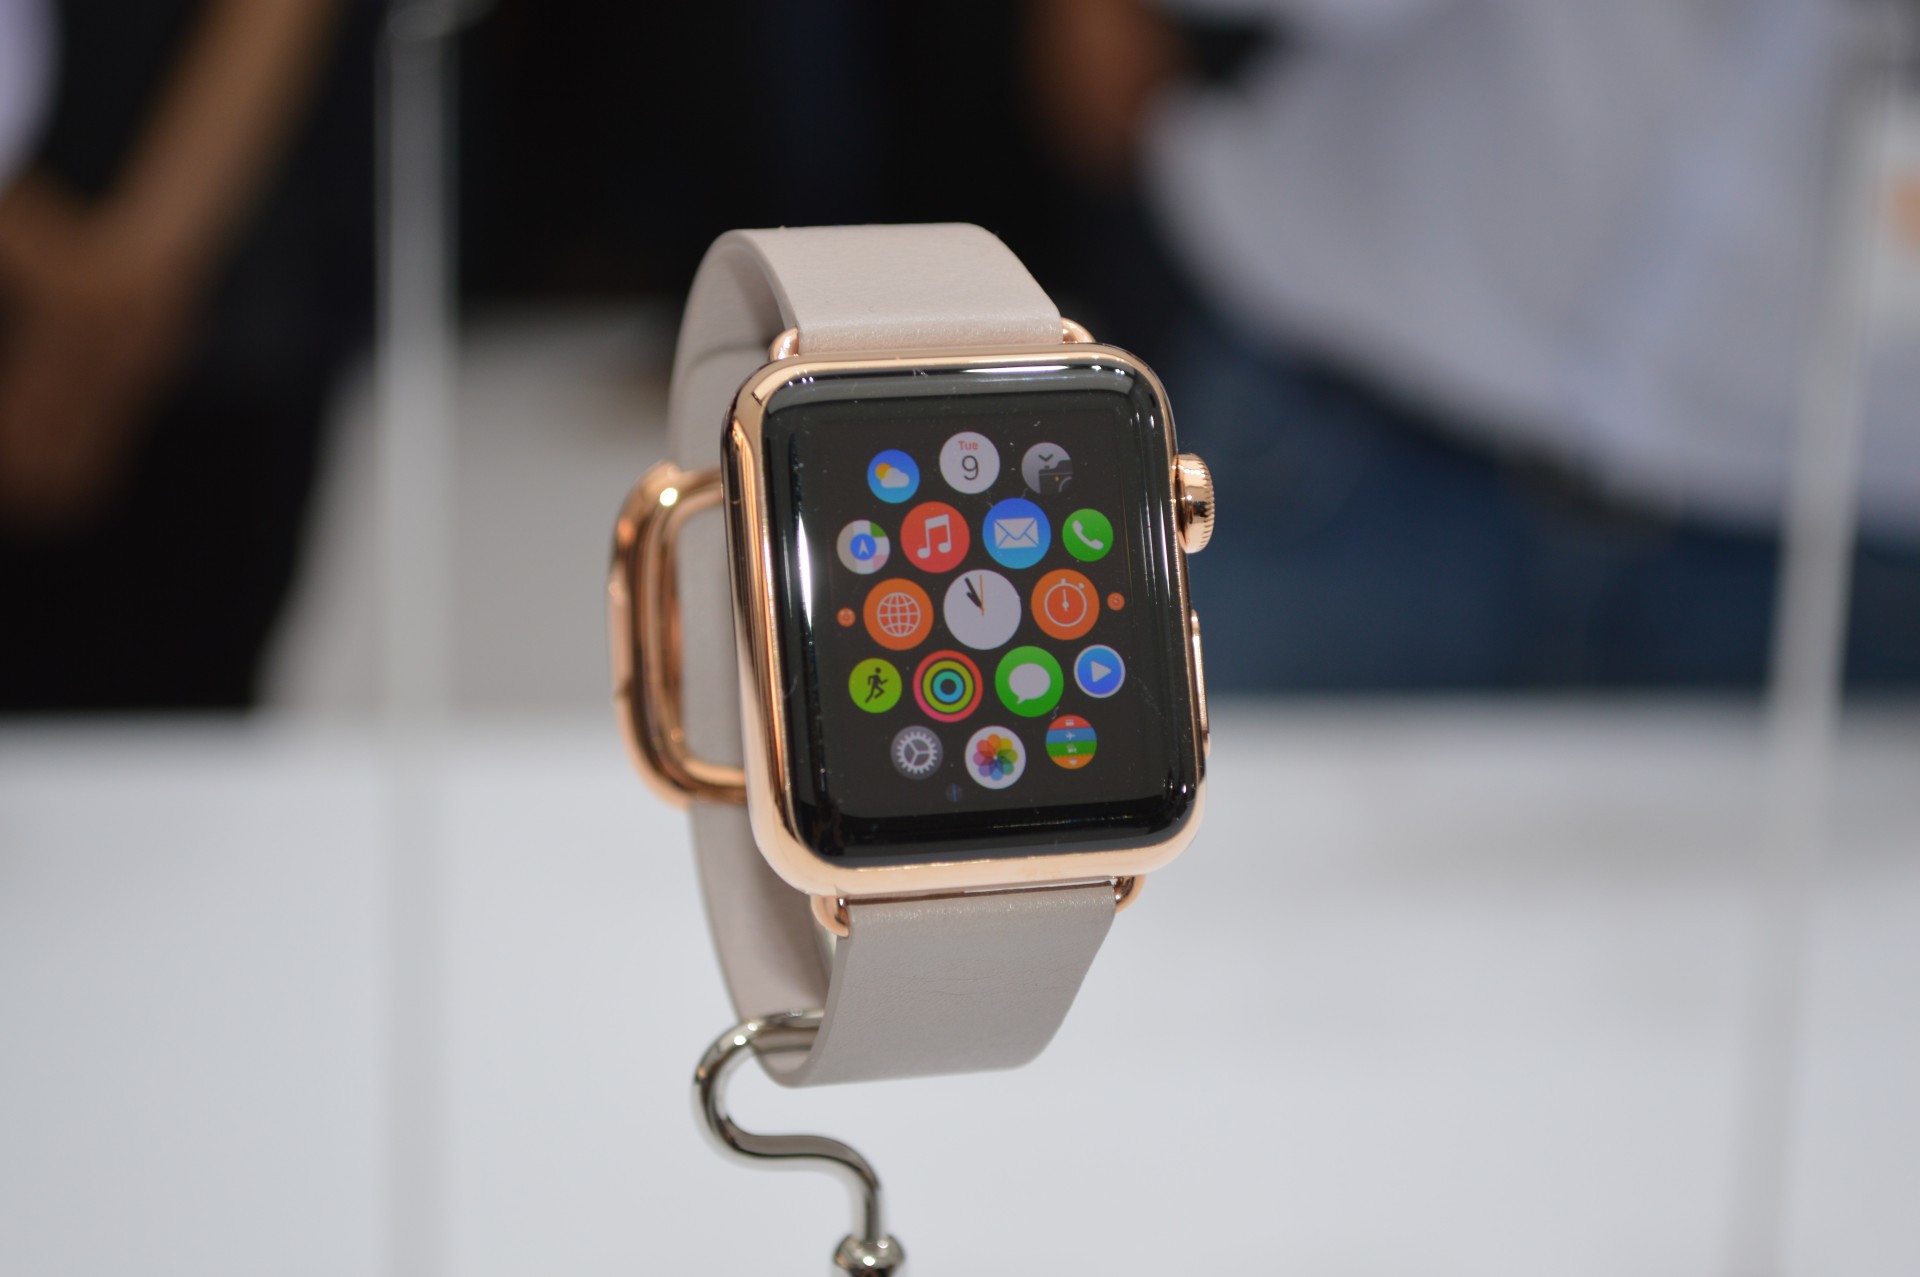 Of Apple Watch Wallpaper And Image Pictures Photos